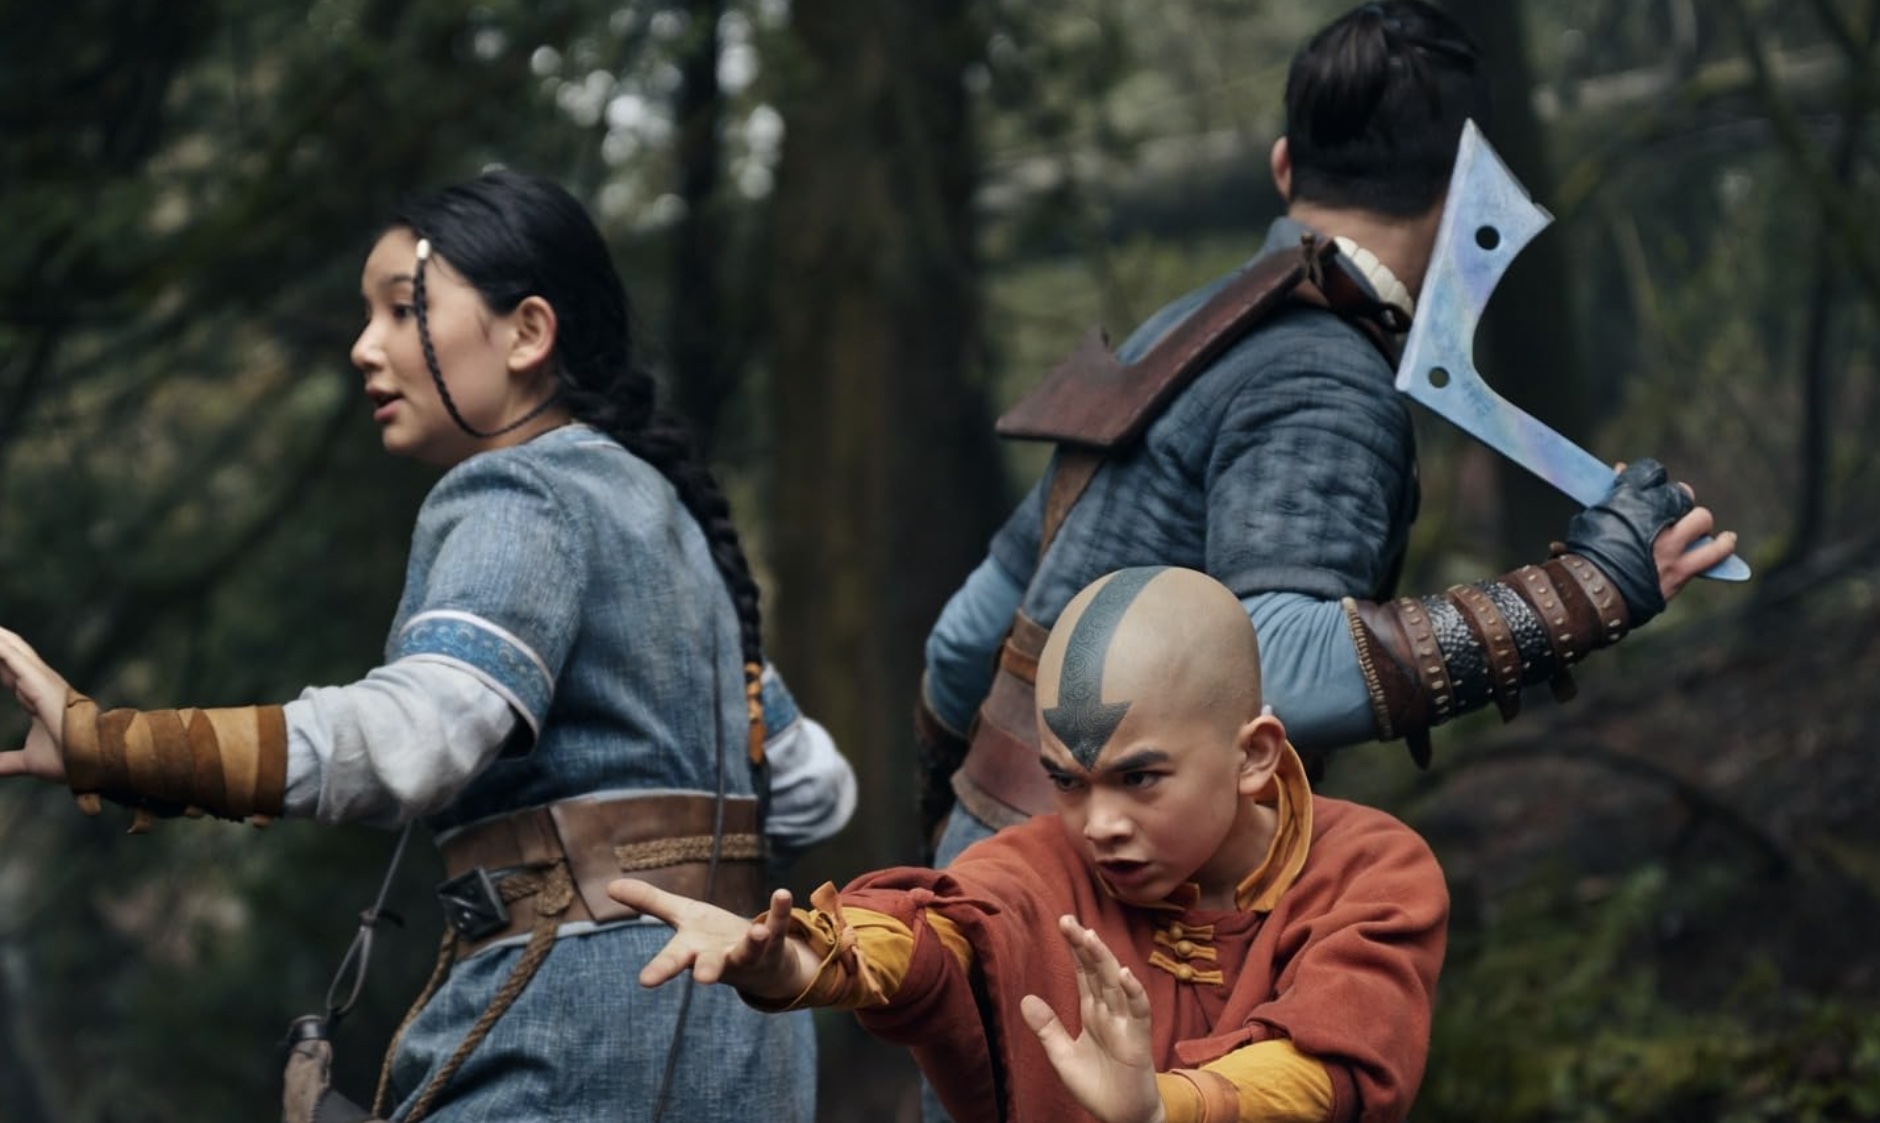 Kiawentiio, Gordon Cormier, and Ian Ousley in Avatar: The Last Airbender (2024)